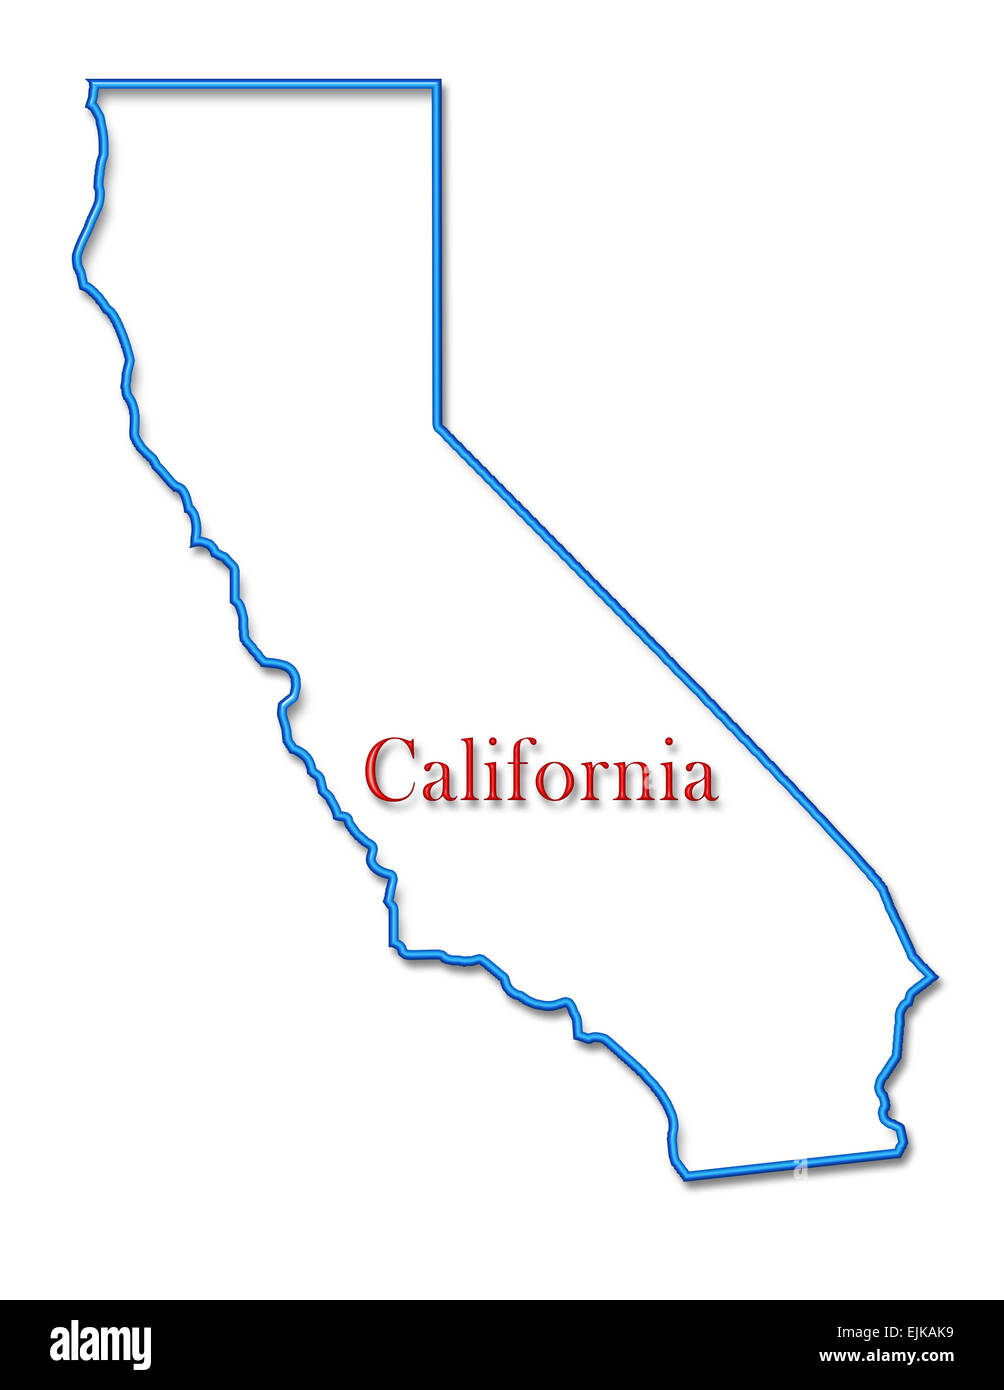 California Map with Neon Blue Outline and Red Lettering Stock Photo